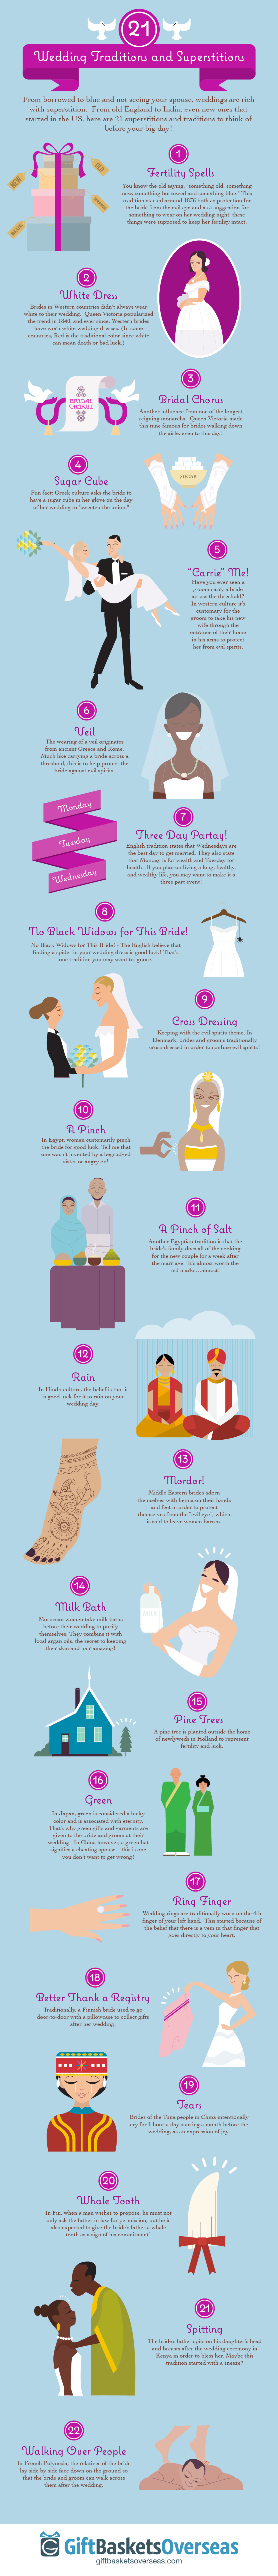 Wedding_Superstitions The Top Wedding Traditions From Around the World